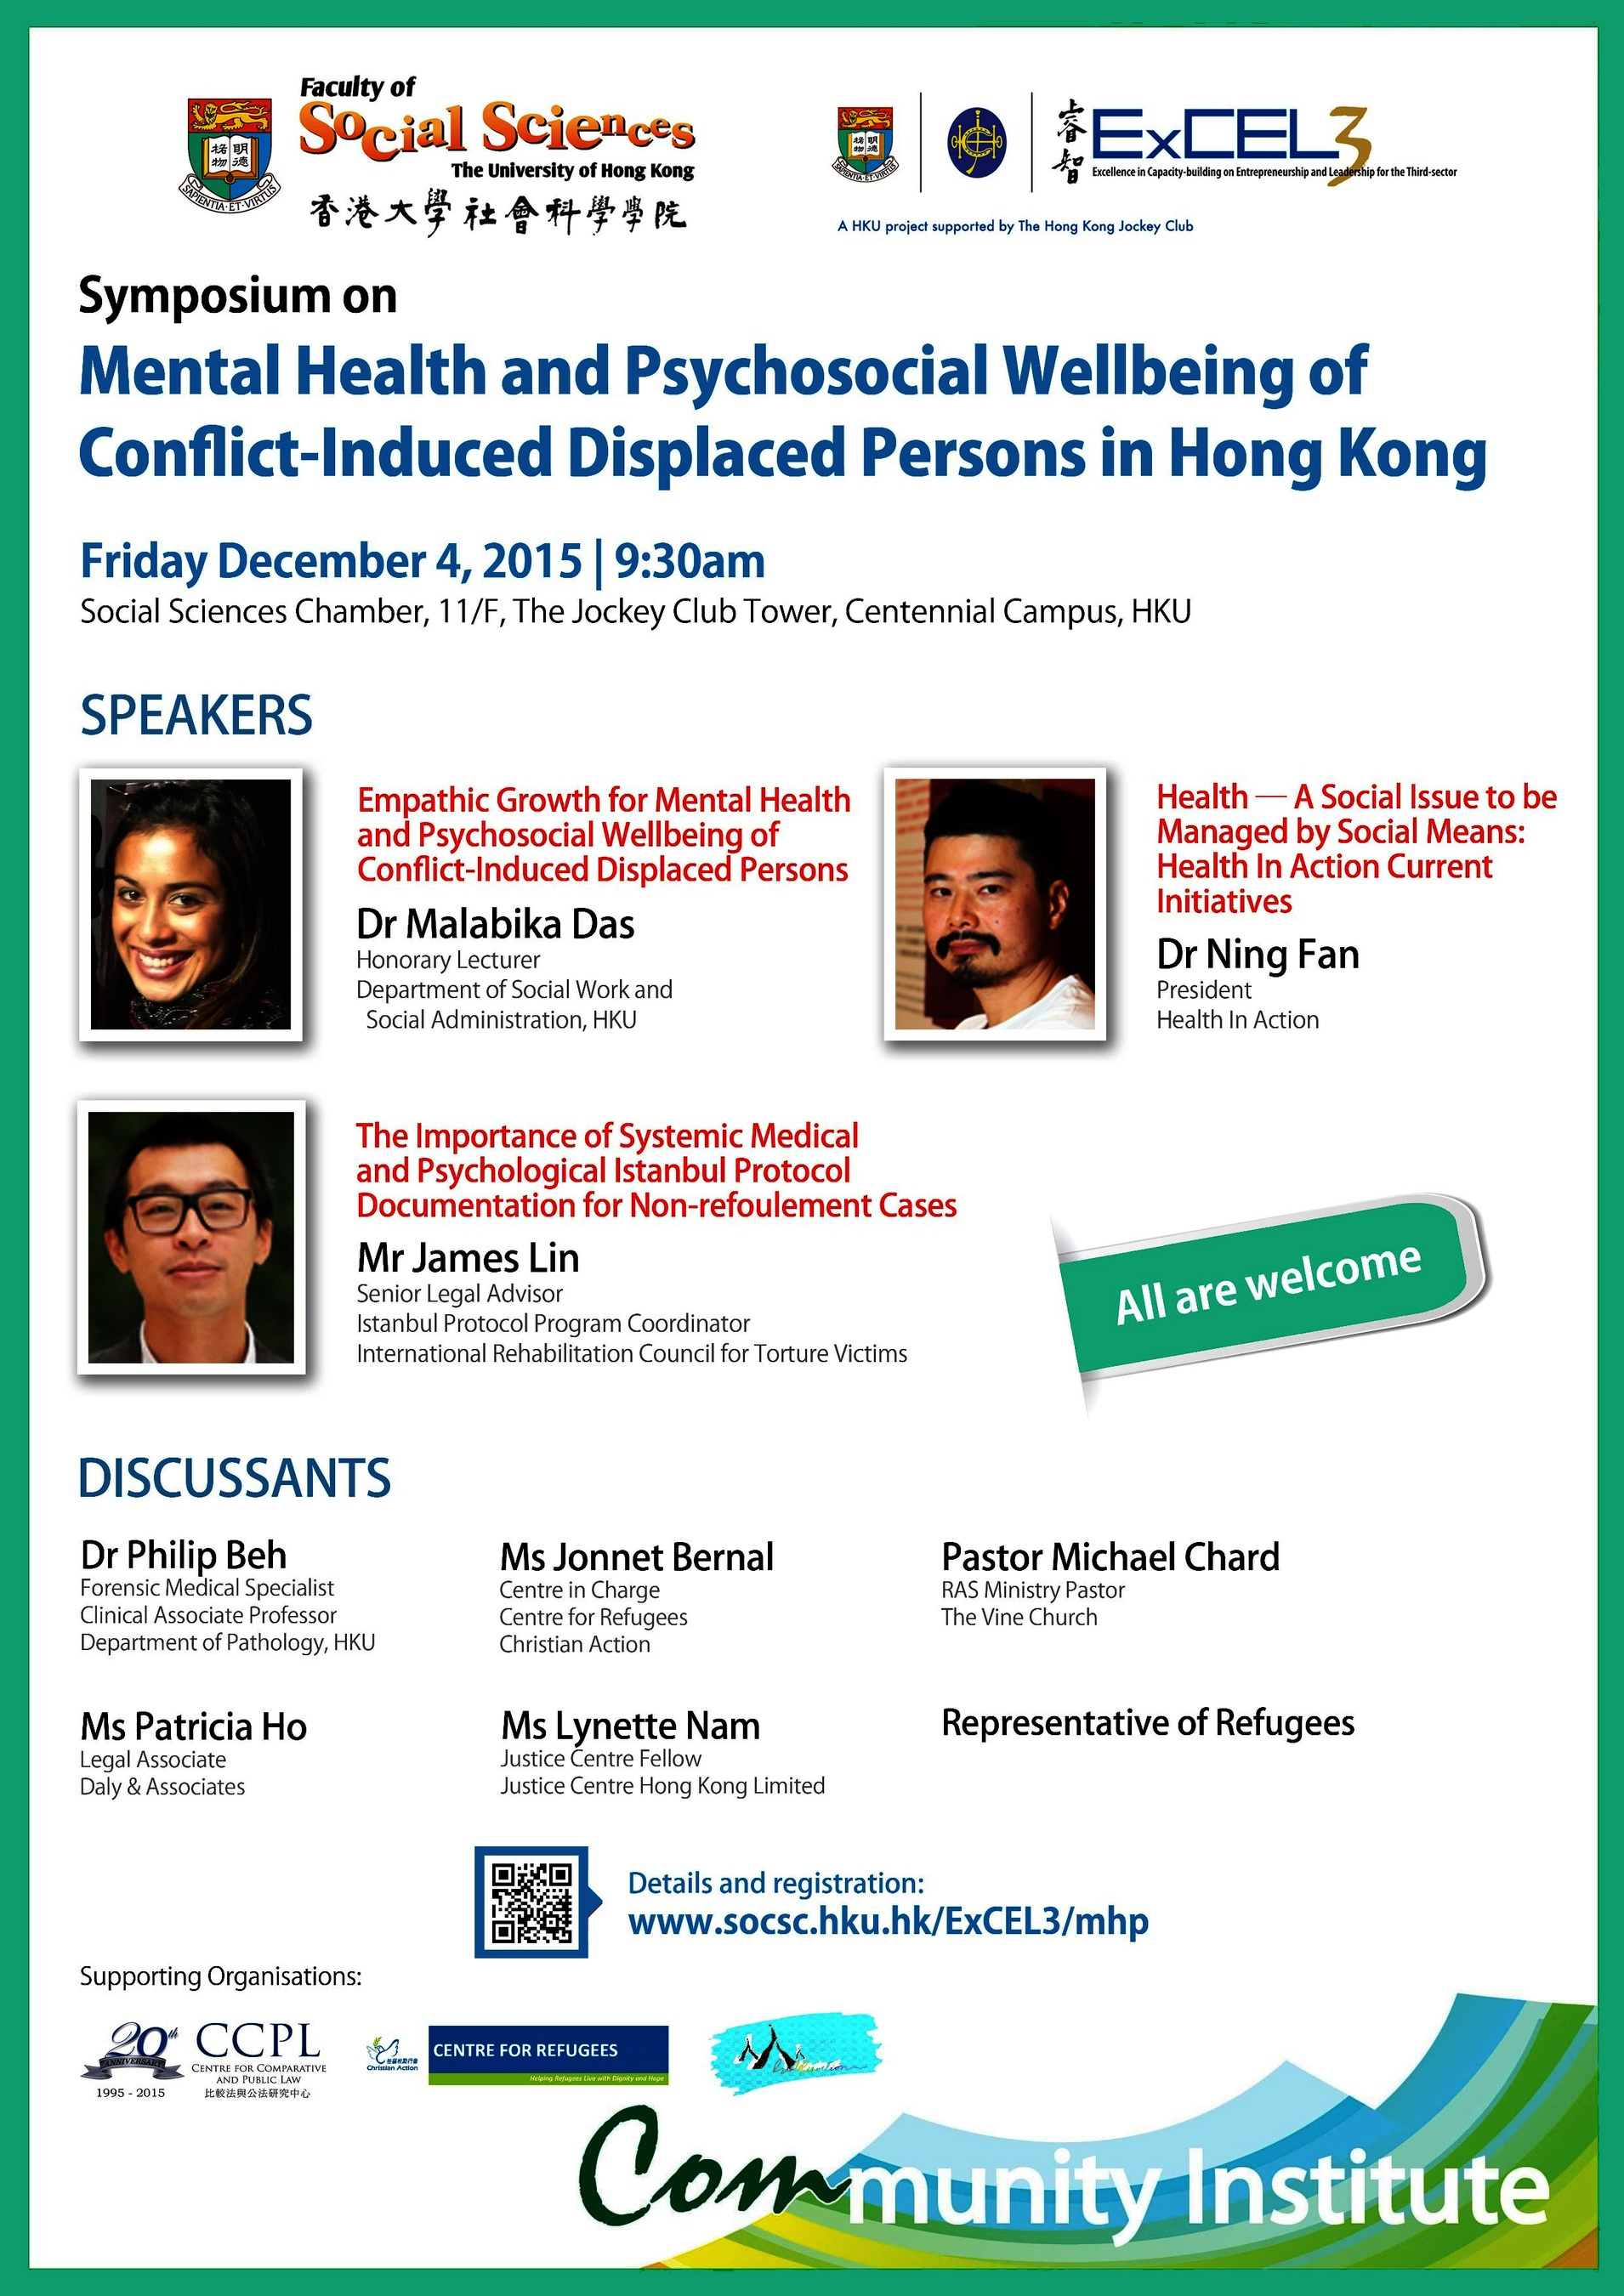 Symposium on Mental Health and Psychosocial Wellbeing of Conflict-Induced Displaced Persons in Hong Kong